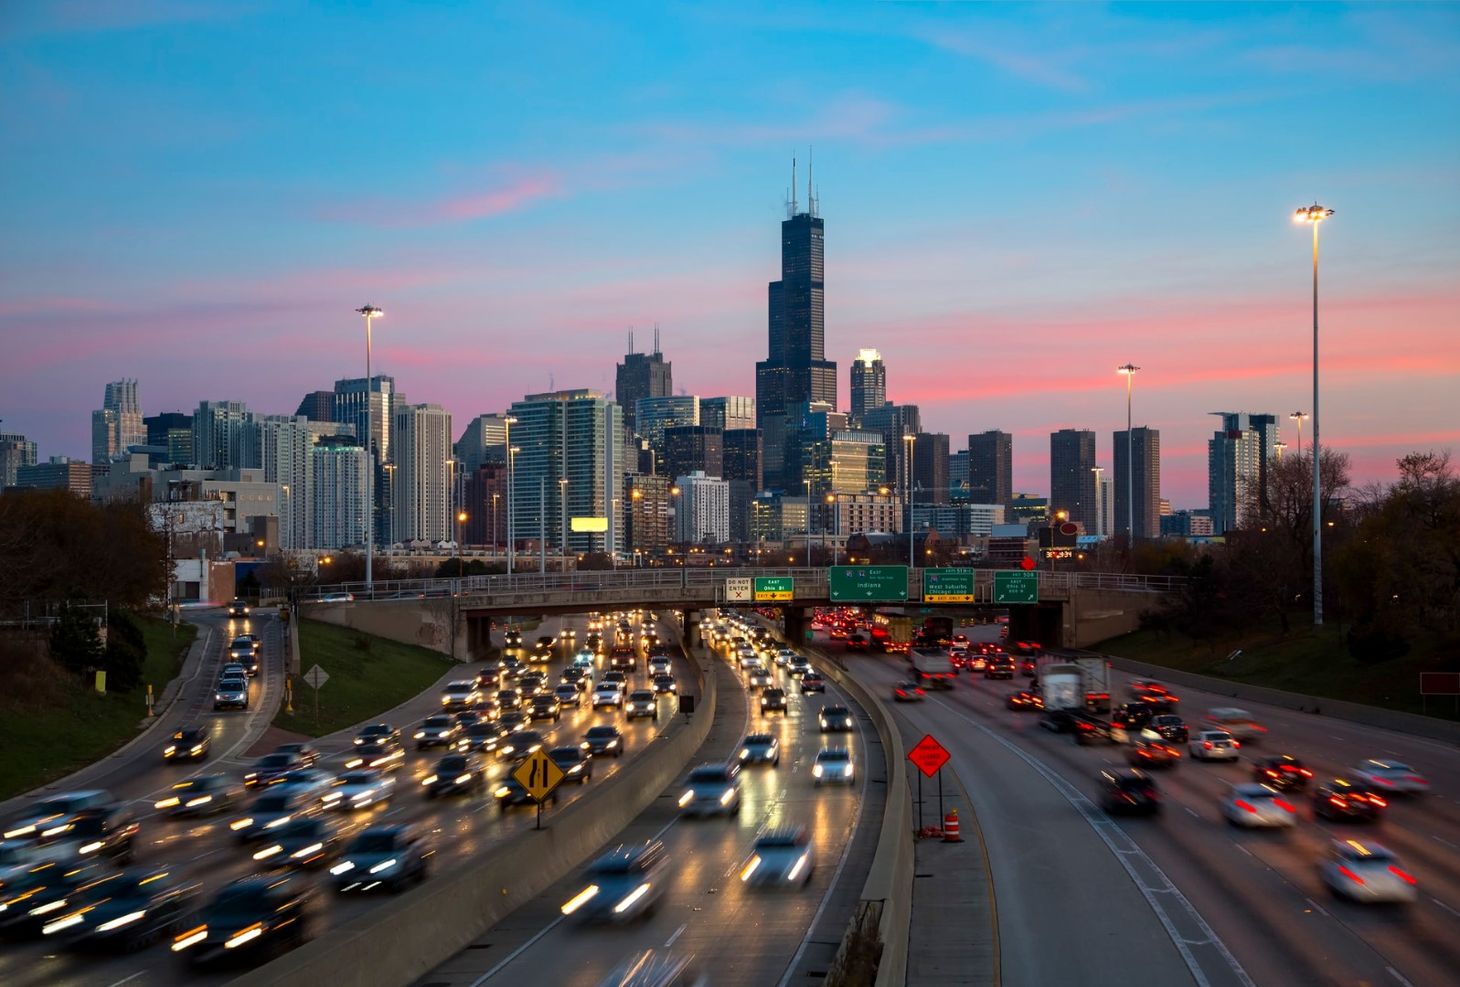 License Plate Cameras in Use on Chicago-area Highways